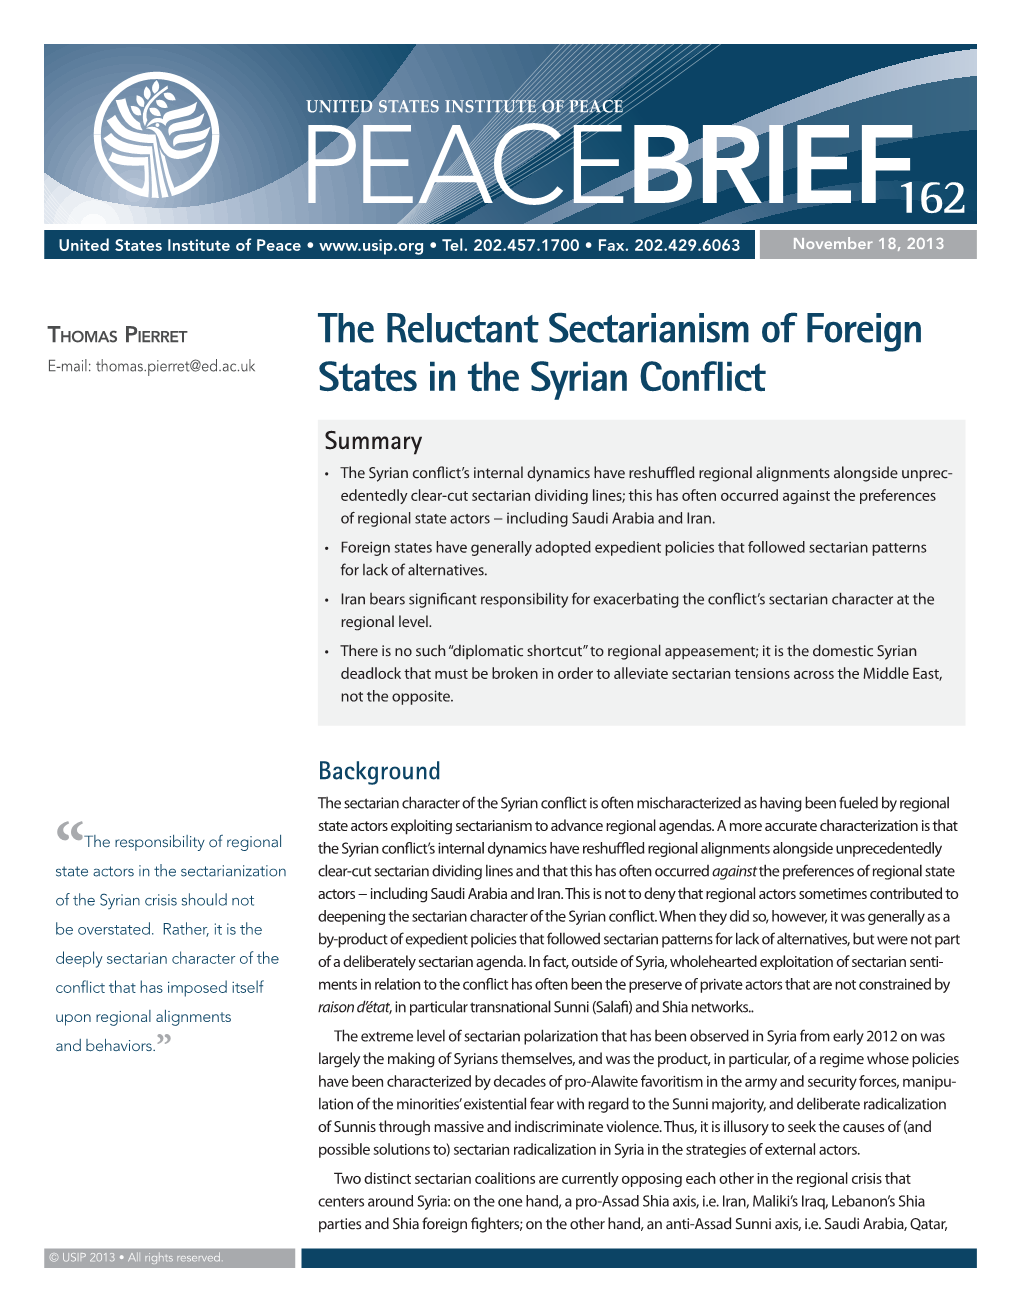 The Reluctant Sectarianism of Foreign States in the Syrian Conflict